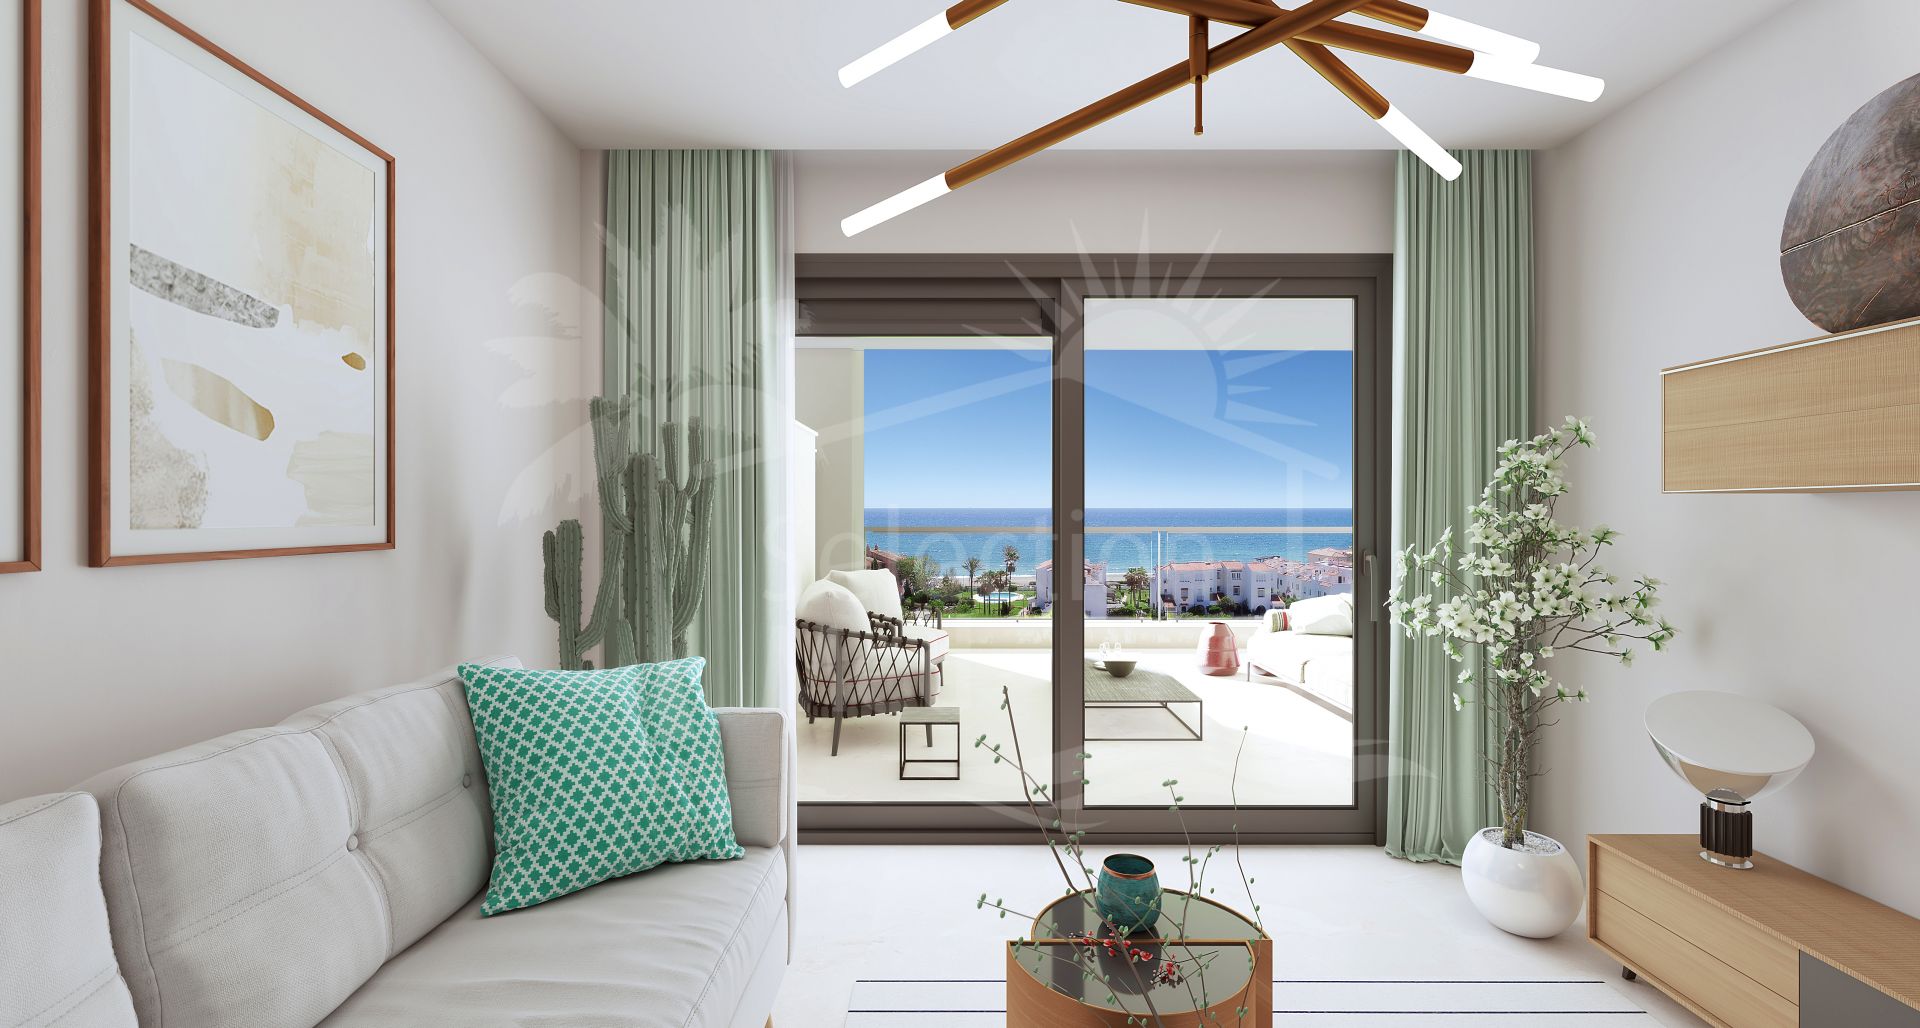 Solemar, contemporary apartments with amazing seaviews in Casares Beach.